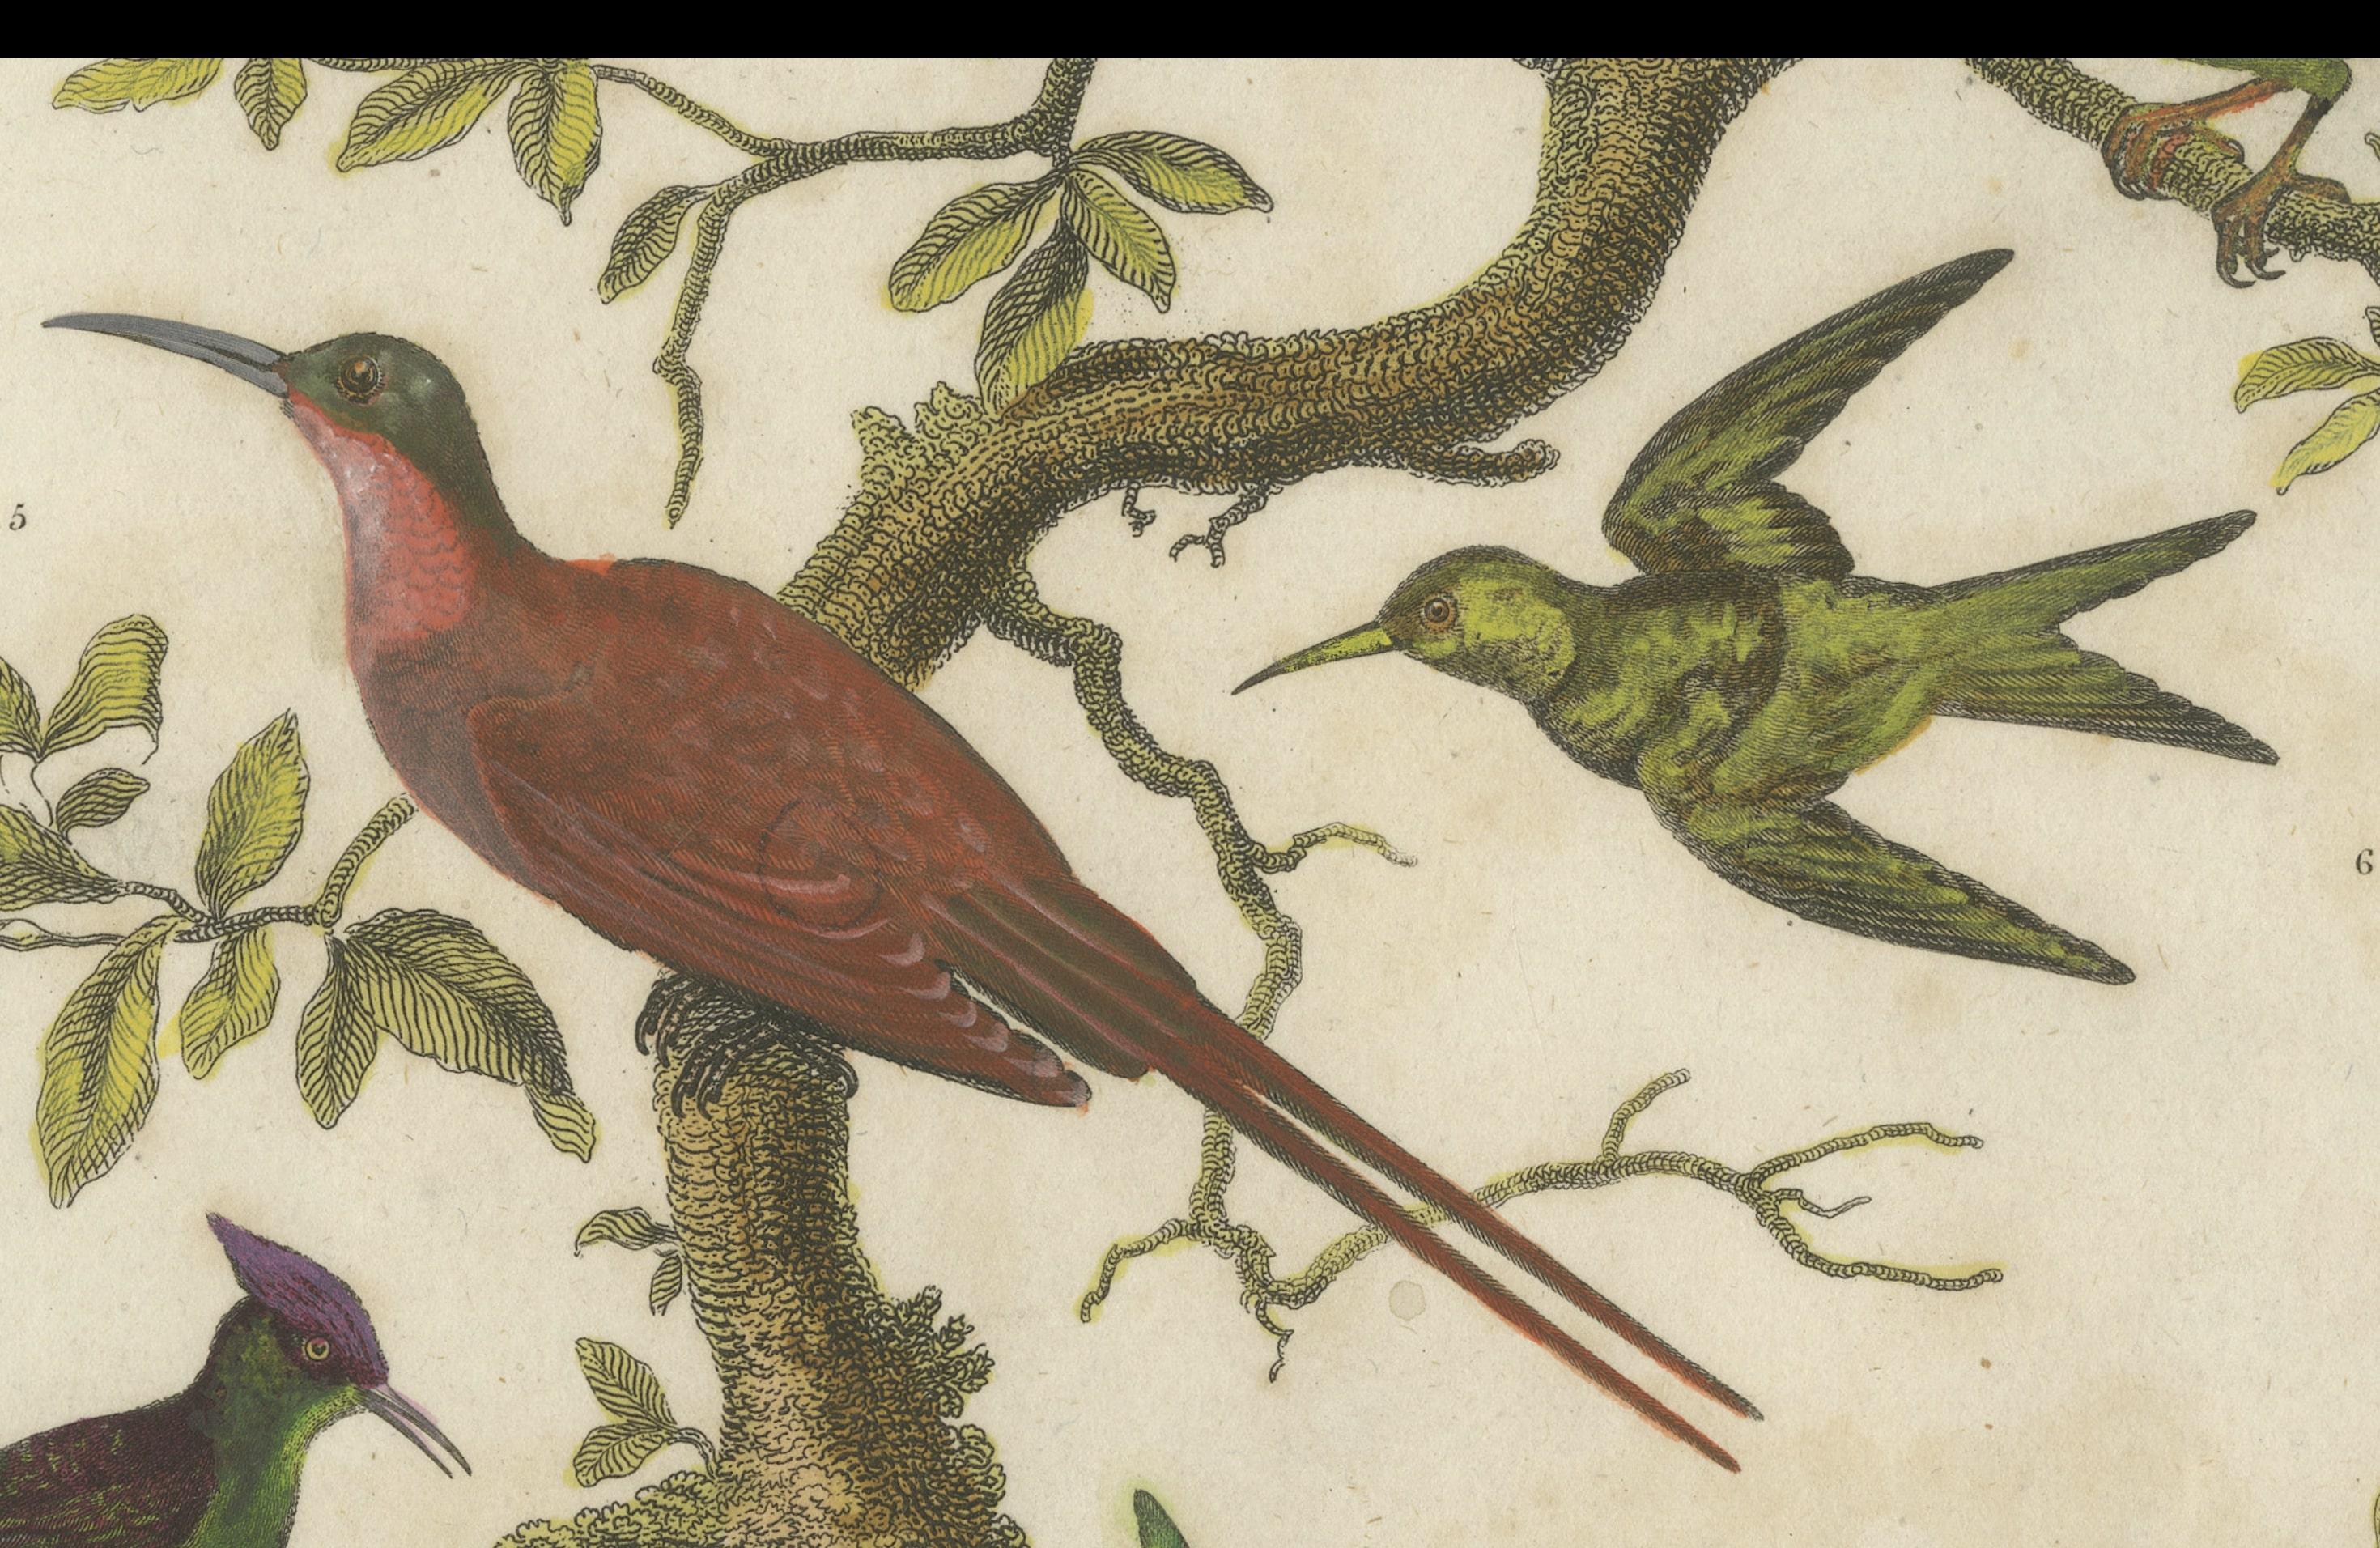 The image is an ornithological print from the early 19th century. It depicts various species of birds perched on branches. The birds are illustrated in vibrant colors with a high level of detail, indicative of the style of natural history